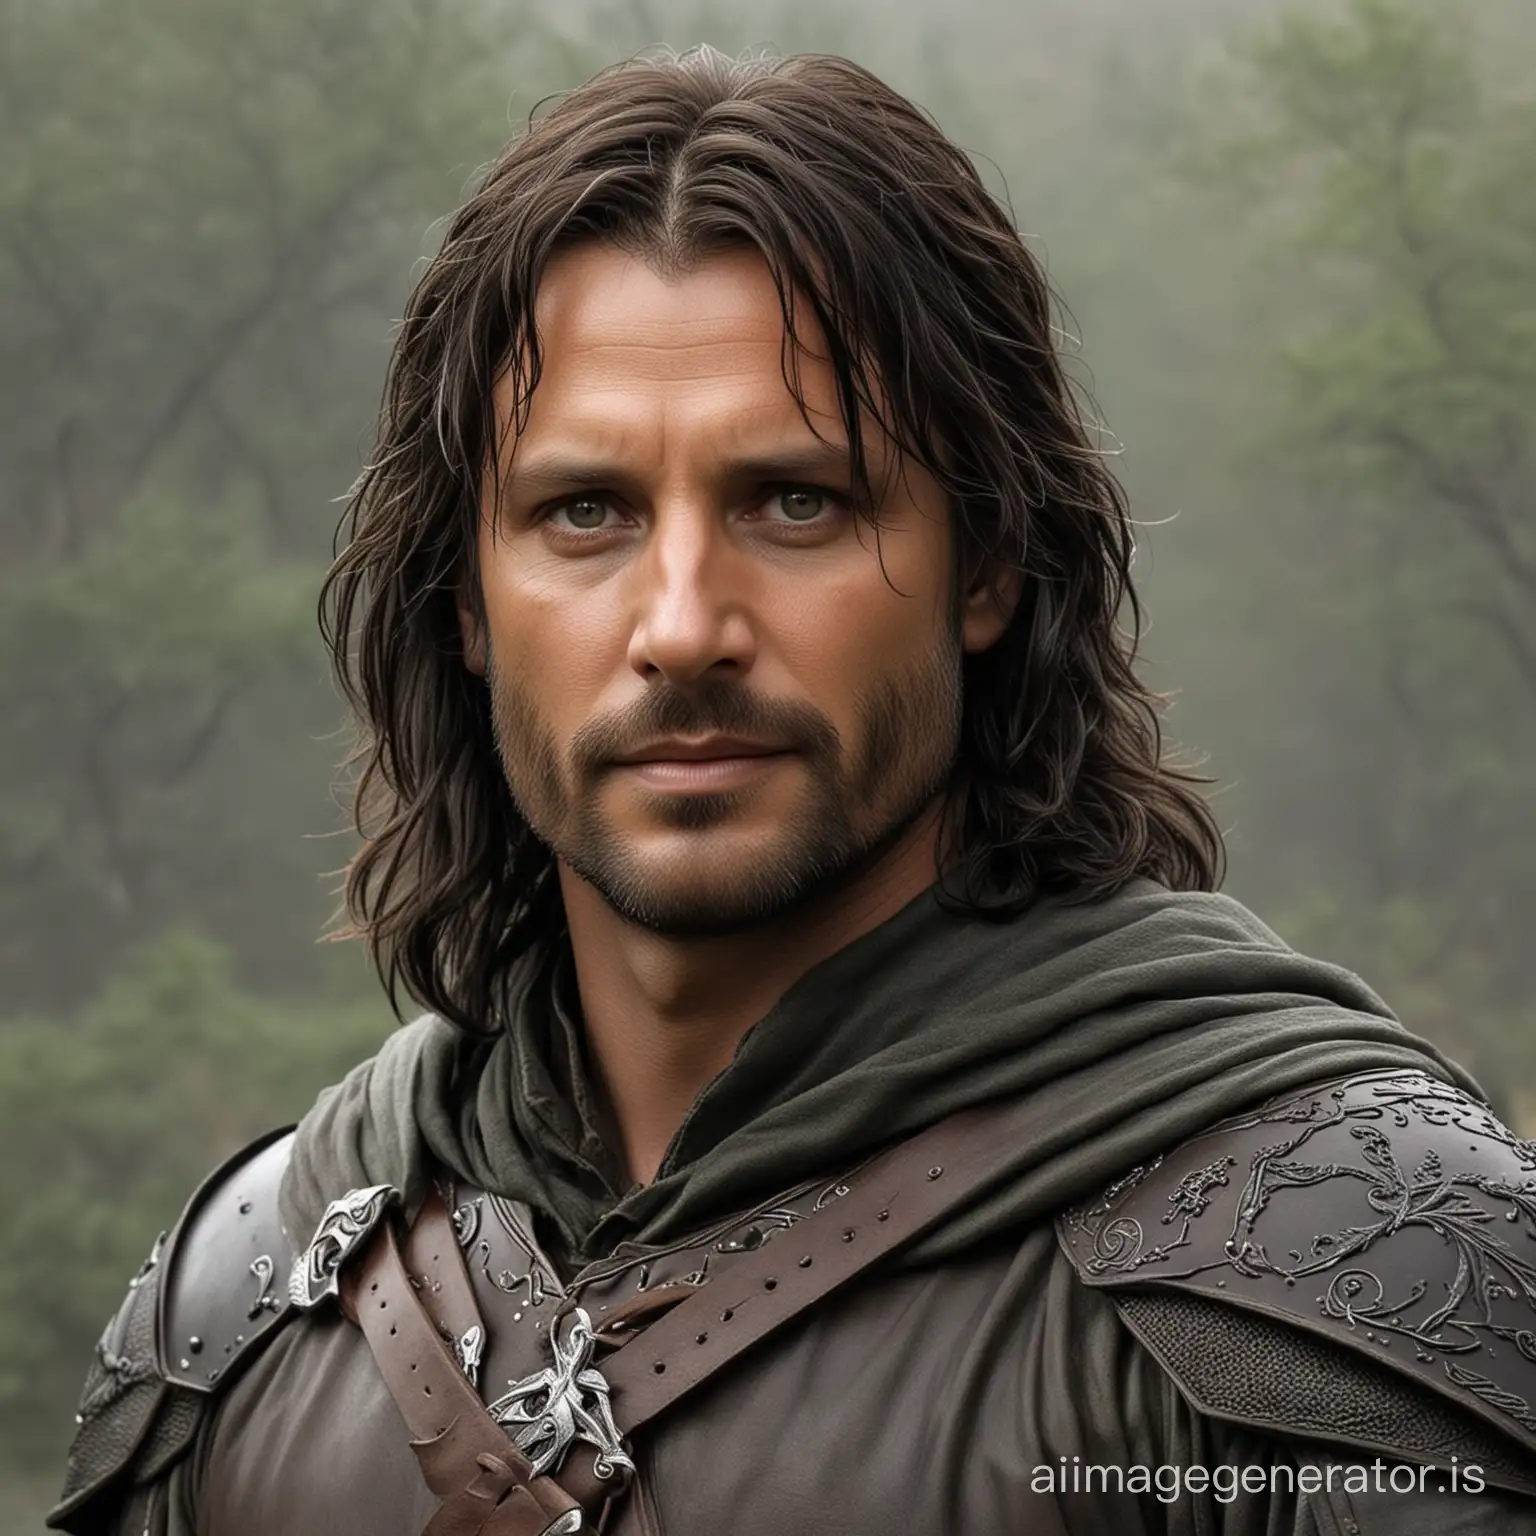 Aragorn, also known as Strider, is a character of rugged and noble appearance. He is tall and strong, with weathered features that hint at a life spent outdoors. His dark hair is often described as unkempt, falling loosely around his face and shoulders. Aragorn's piercing grey eyes hold a sense of wisdom and determination, reflecting his lineage as a descendant of the ancient line of kings.

He typically wears practical attire suitable for a ranger, consisting of a worn cloak, leather armor, and sturdy boots. His cloak is often dark in color, blending with the shadows as he moves through the wilderness. Despite his rugged appearance, Aragorn carries himself with a regal bearing, exuding authority and command.

In battle, Aragorn is a formidable warrior, wielding his sword with skill and bravery. He is also known for his compassion and loyalty to his friends and allies, traits that make him a natural leader among the Fellowship of the Ring. Throughout his journey, Aragorn's character undergoes growth and development, as he embraces his destiny as the rightful heir to the throne of Gondor and embraces his role as a leader in the fight against the forces of darkness